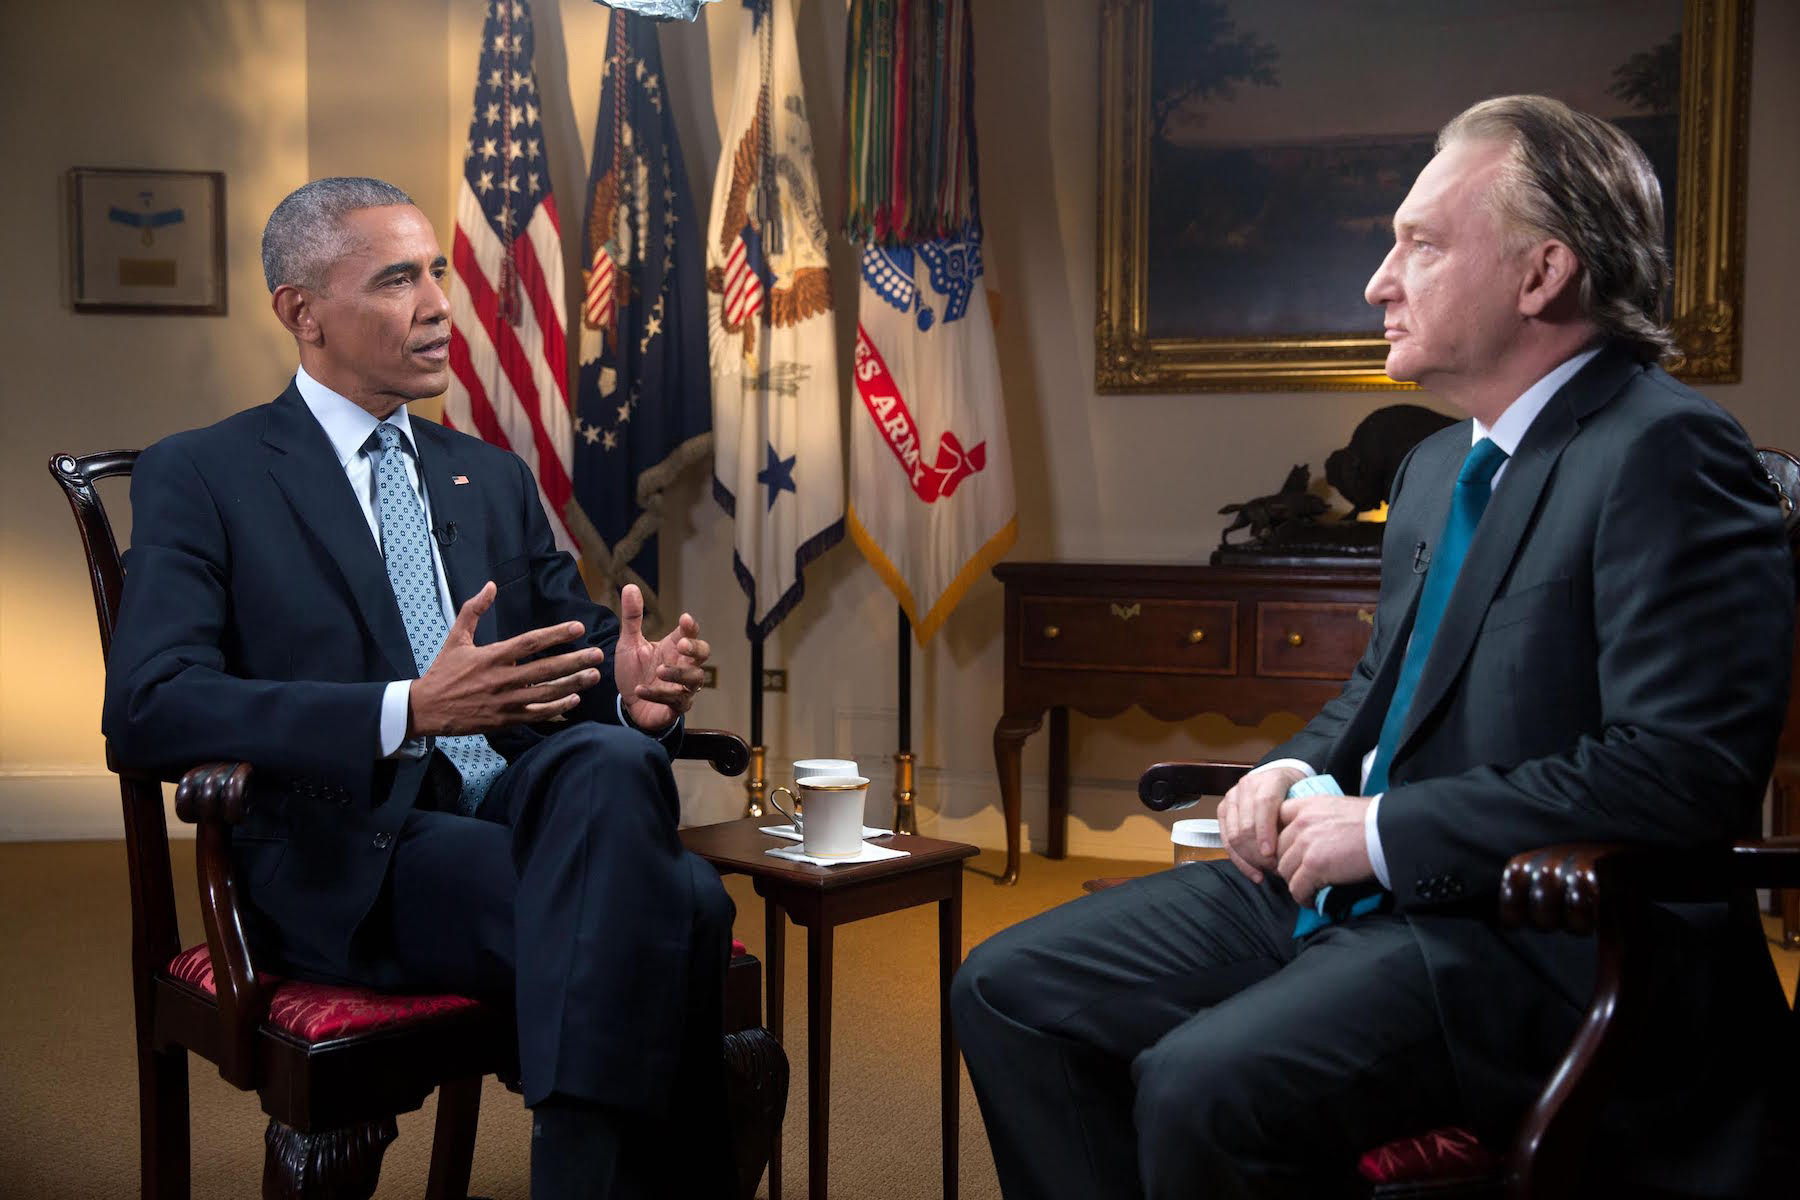 In this Tuesday, Nov. 1, 2016 photo provided by HBO, host Bill Maher, right, speaks with his interview guest, President Barack Obama, left, during a taping of the television show "Real Time with Bill Maher," at the White House in Washington. The show aired on HBO's "Real Time" Friday night, Nov. 4. Obama spoke with pride of his achievements during his two terms as chief executive, saying "every single issue we've made progress on" will be on the ballot next Tuesday in the form of the opposing candidates. (Amanda Lucidon/HBO via AP)